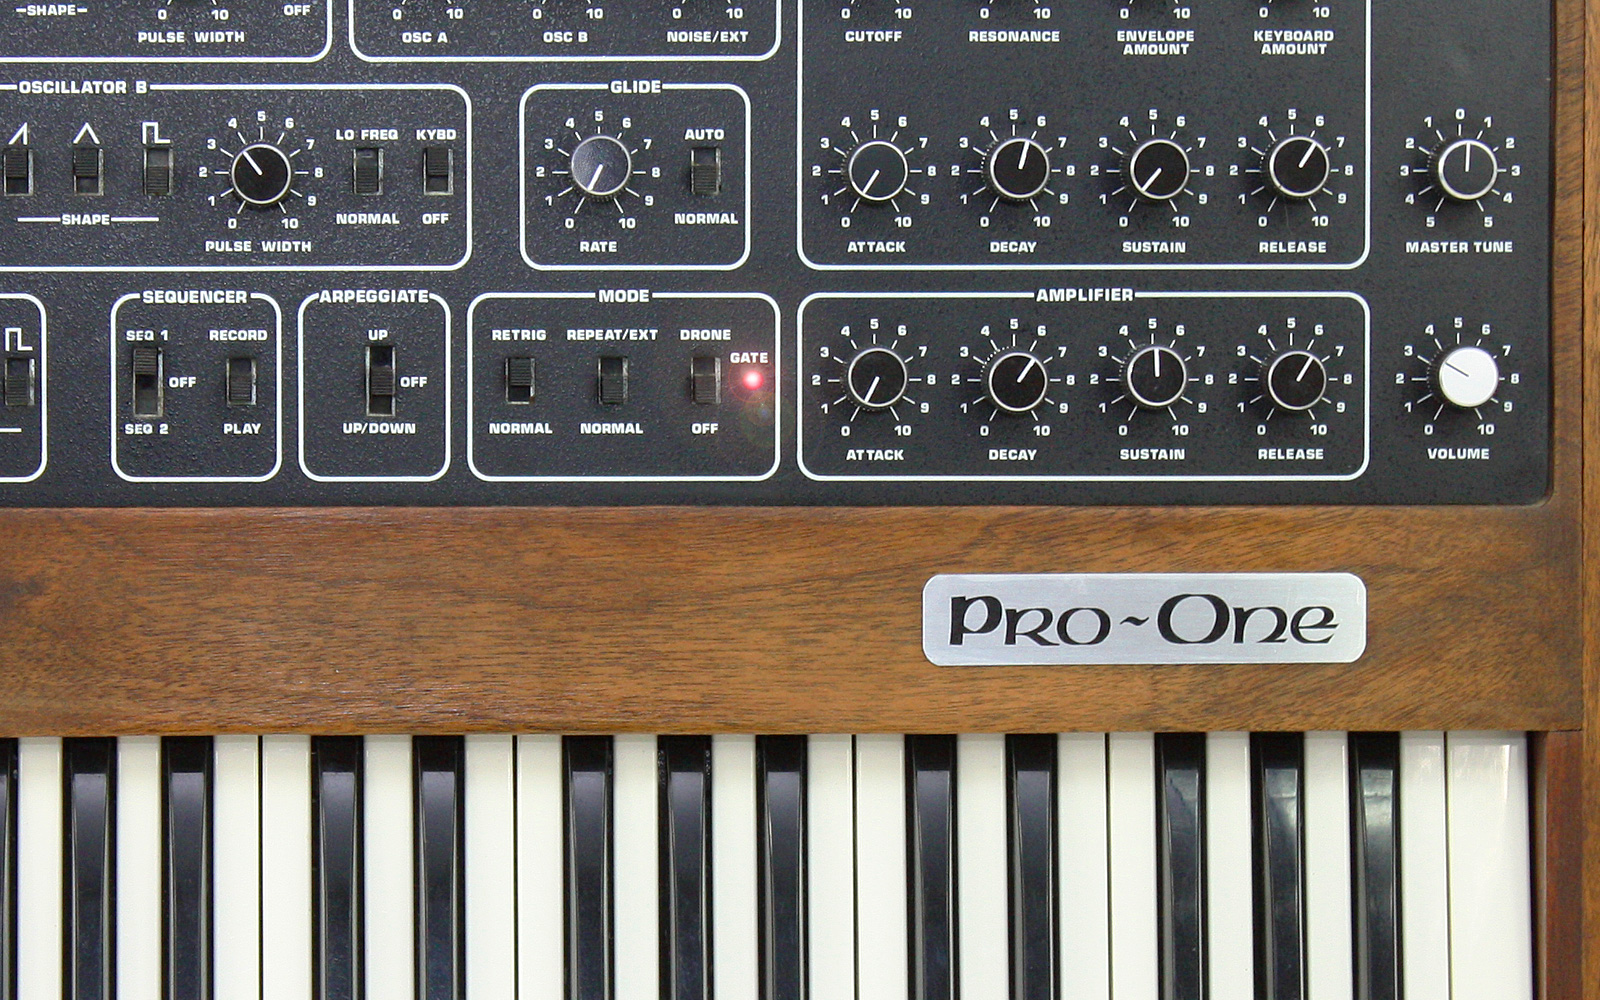 Sequential Pro-One Synthesizer